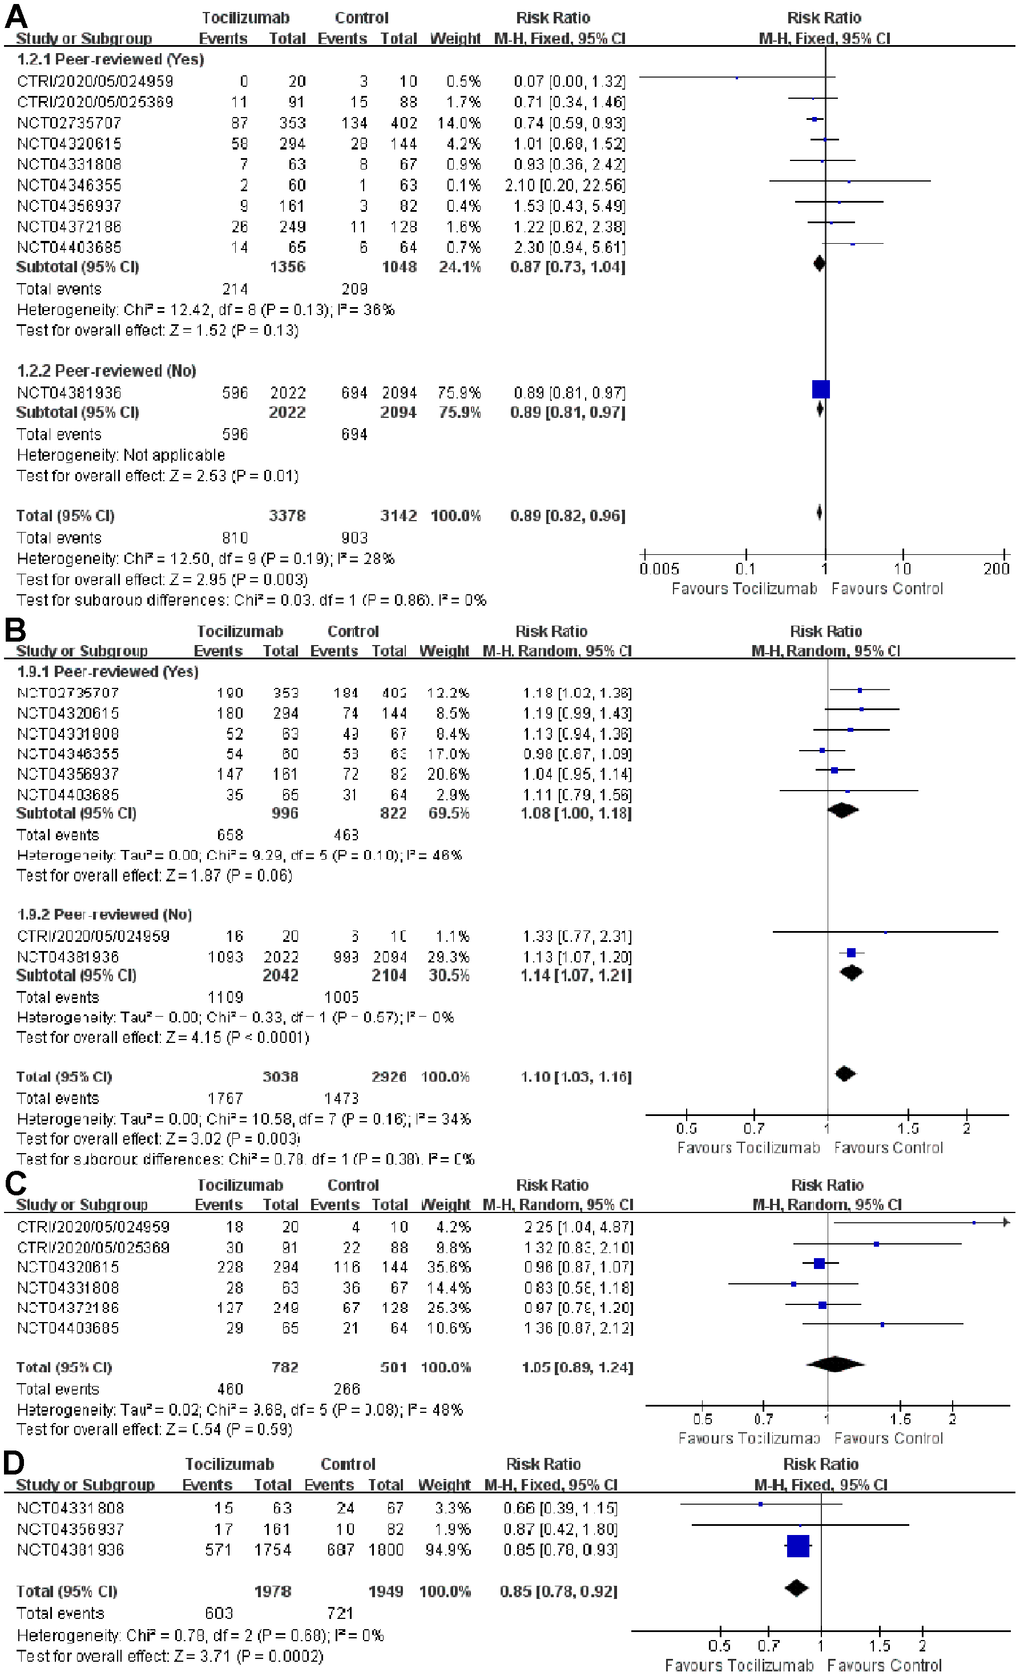 Association of tocilizumab with all-cause mortality, discharge, patients of adverse events, and date of incubation or death in the published study and preprint study (A) all-cause mortality (B) discharge (C) patients of adverse events (D) date of incubation or death.